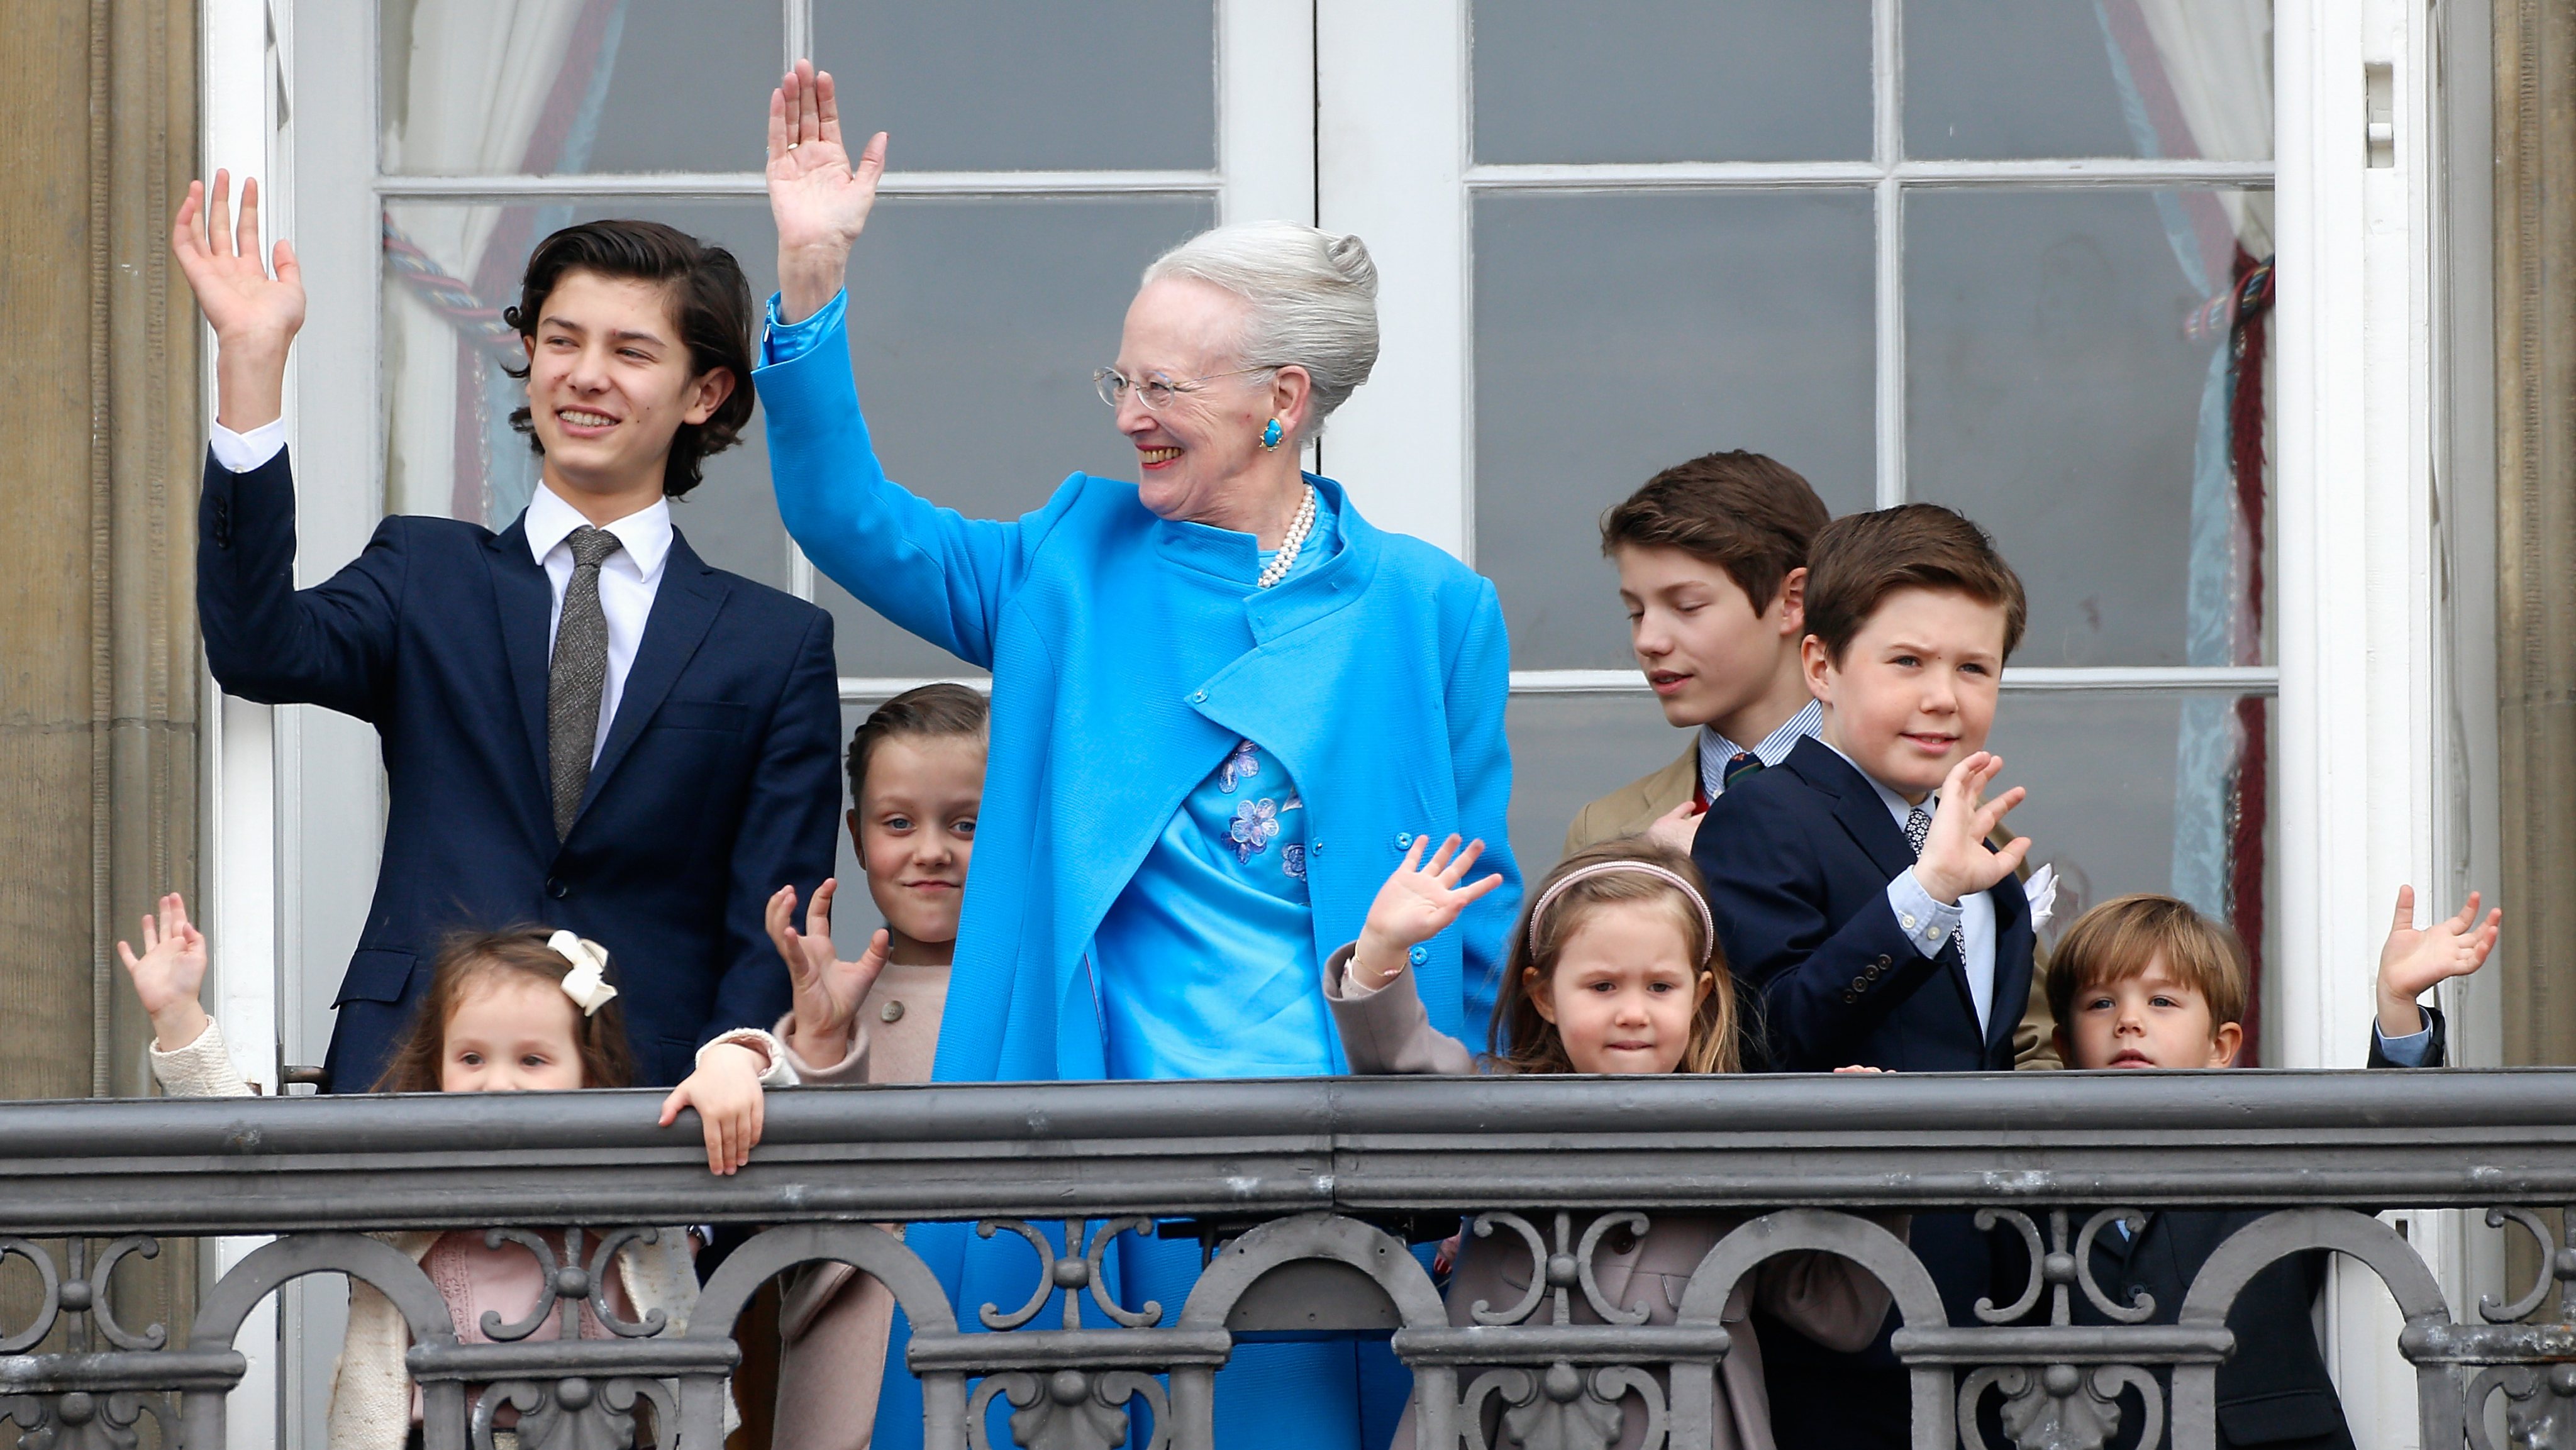 Queen Margrethe II Of Denmark And Family Celebrate Her Majesty&#039;s 76th Birthday